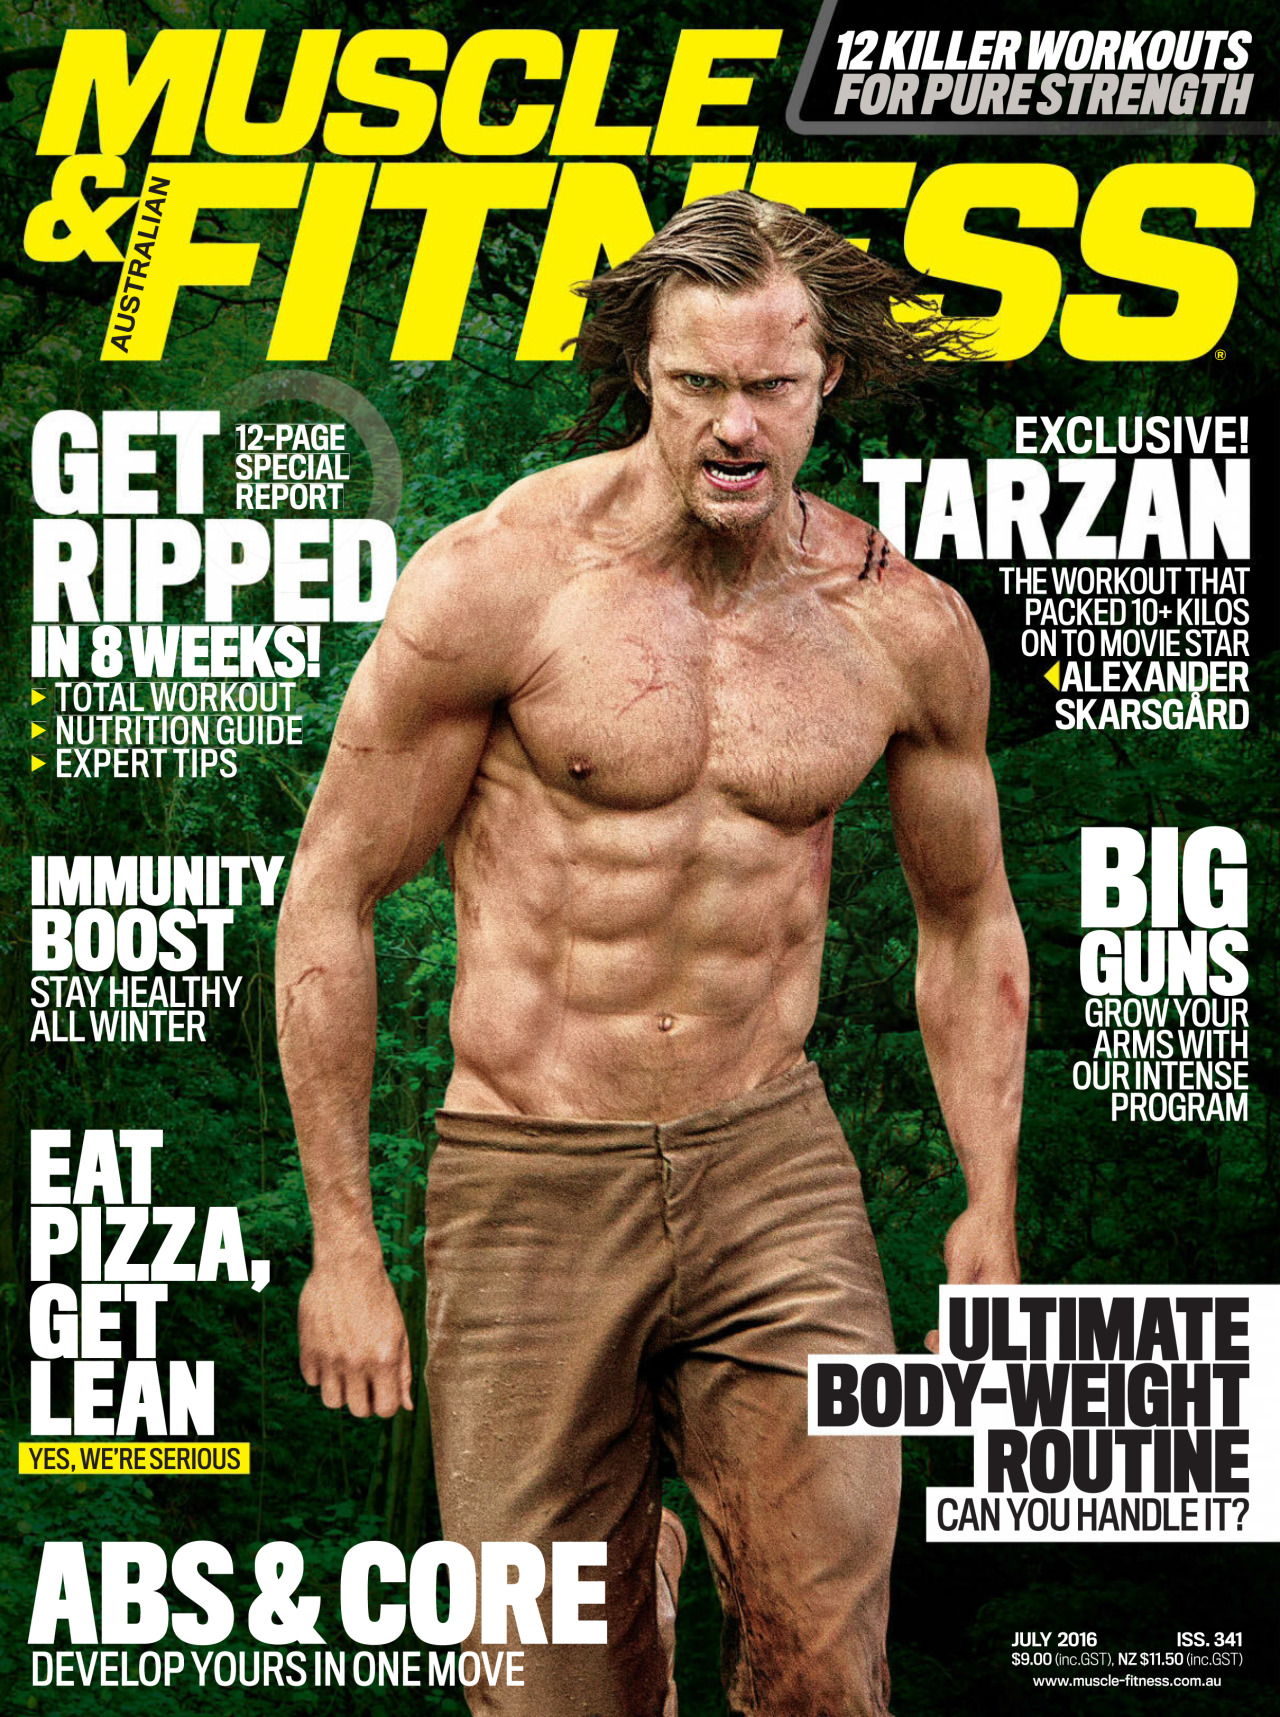 SkarsJoy — Alexander Skarsgård is on the cover and there is a...